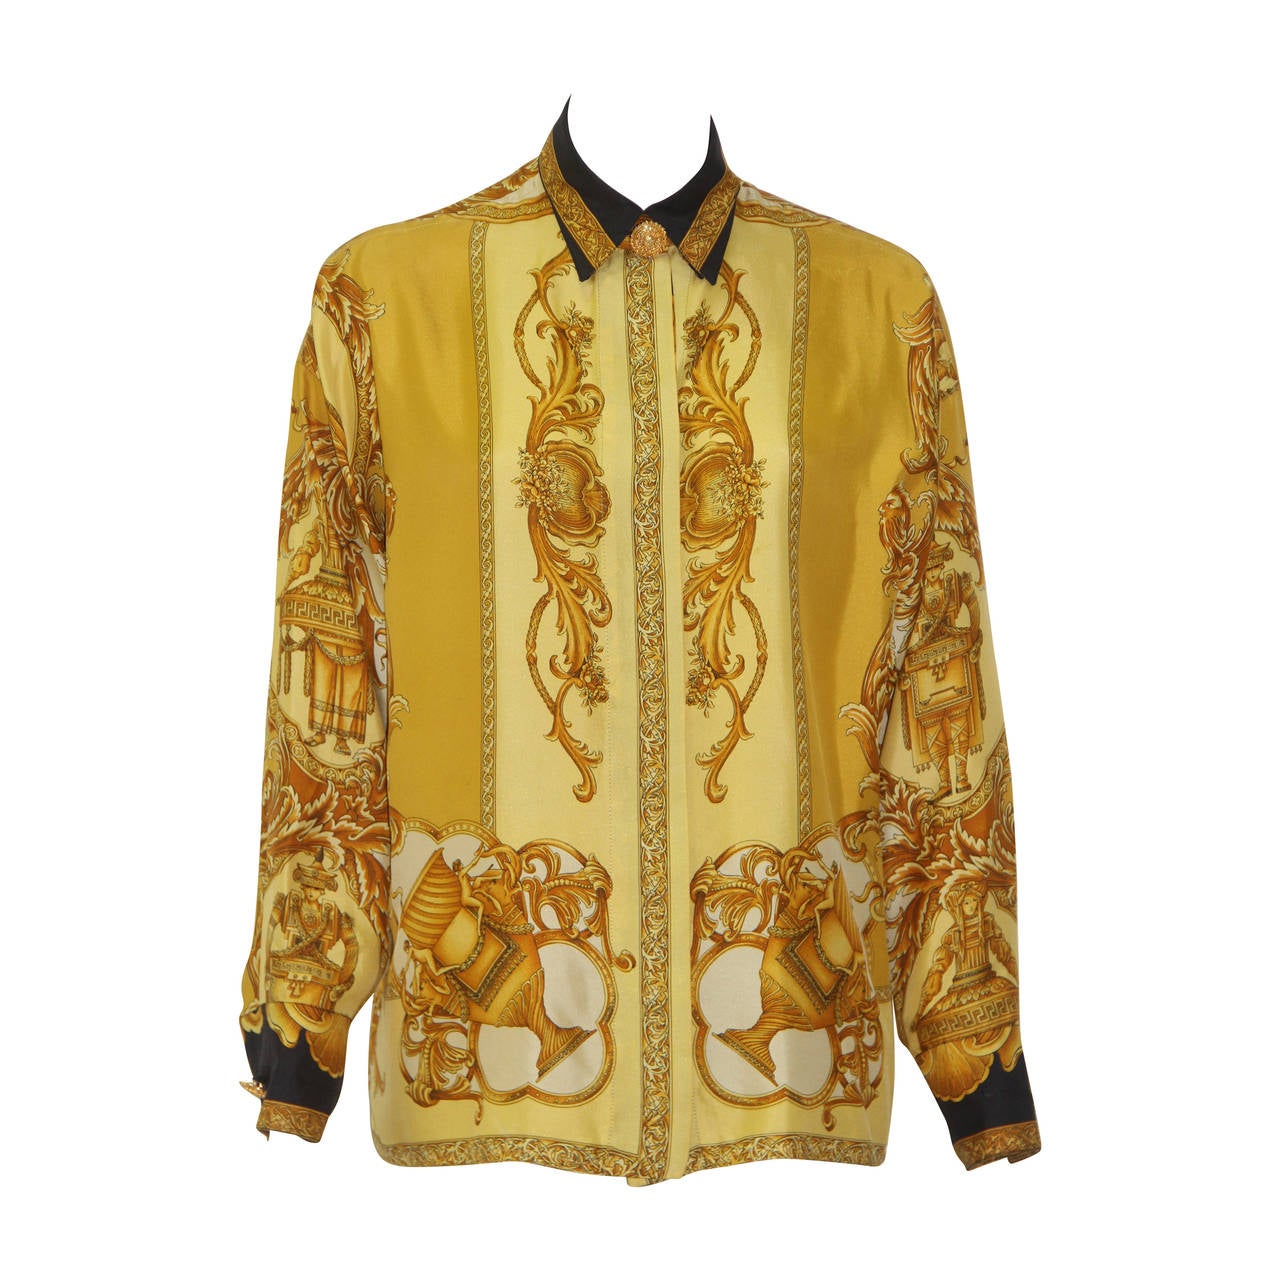 Gianni Versace Bondage Collection Baroque Printed Blouse Fall 1992 For Sale